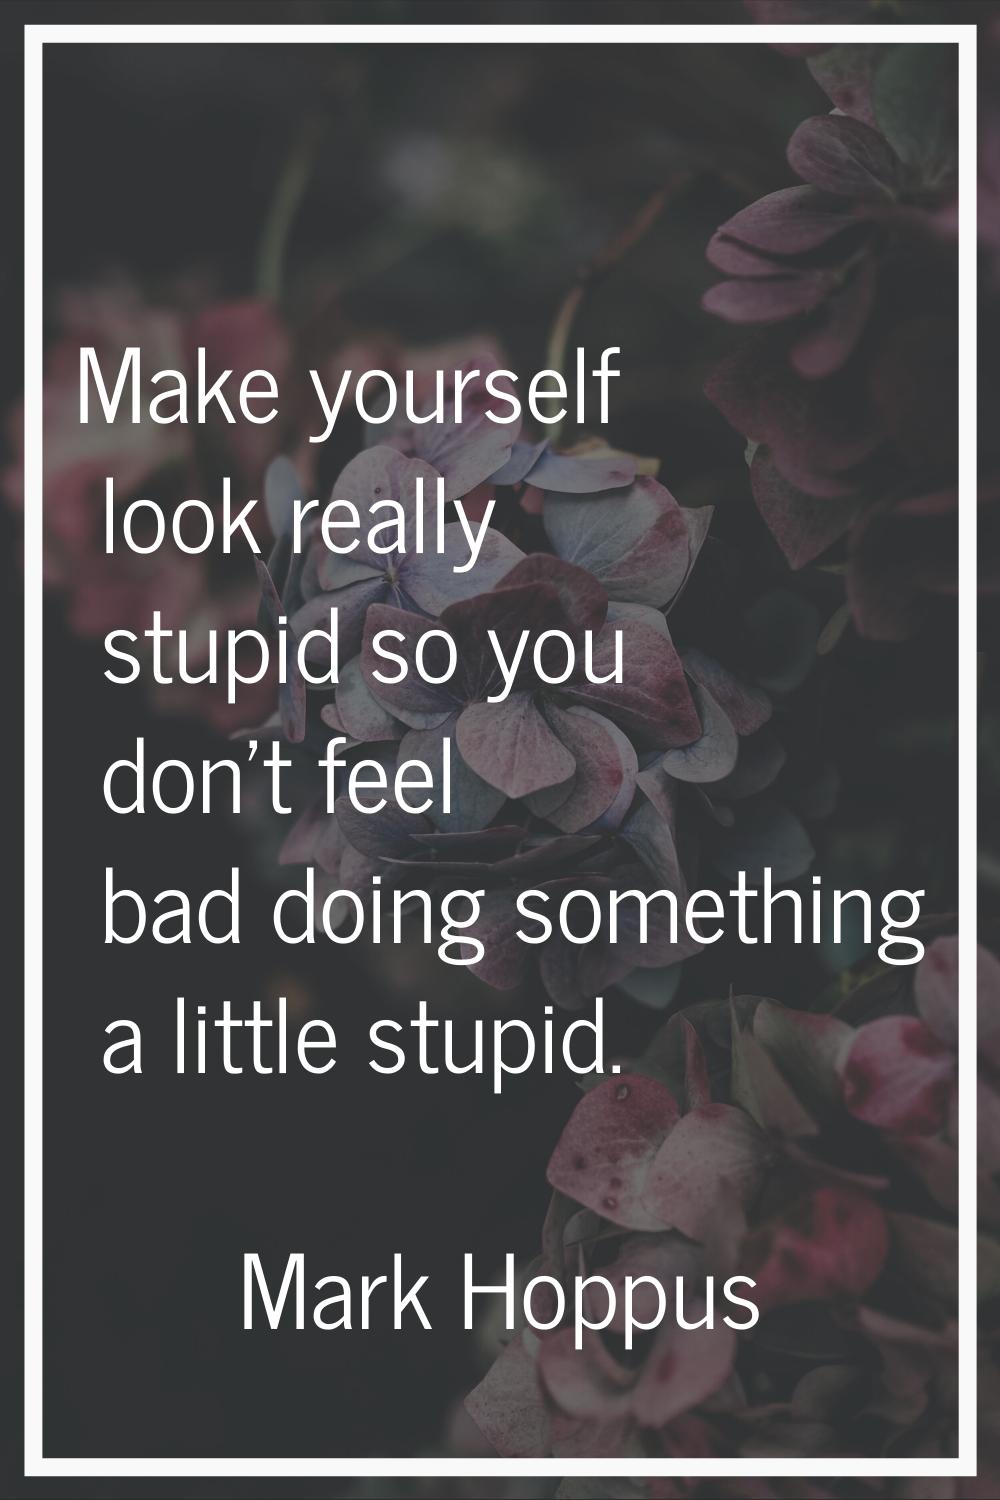 Make yourself look really stupid so you don't feel bad doing something a little stupid.